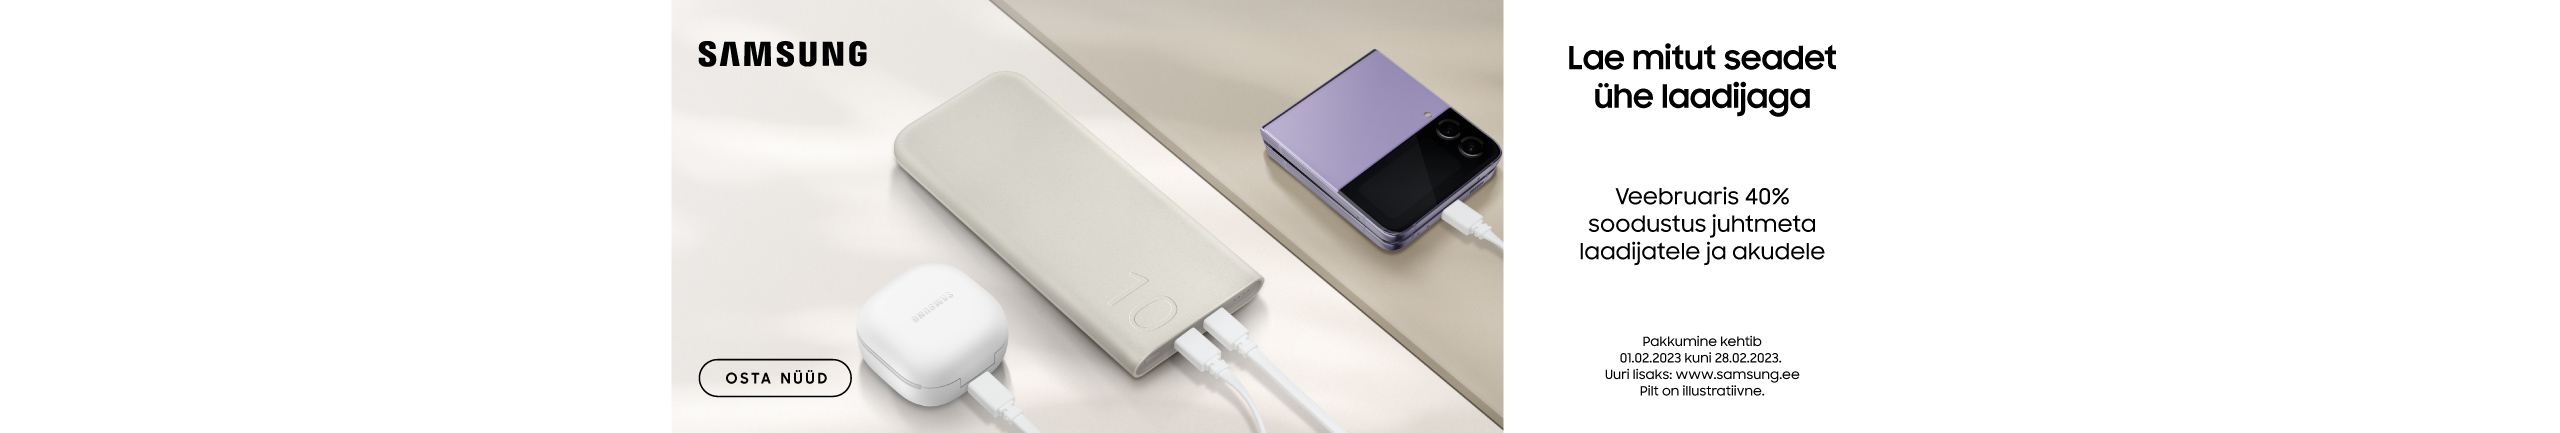 Samsung wireless chargers and power banks 40% off!